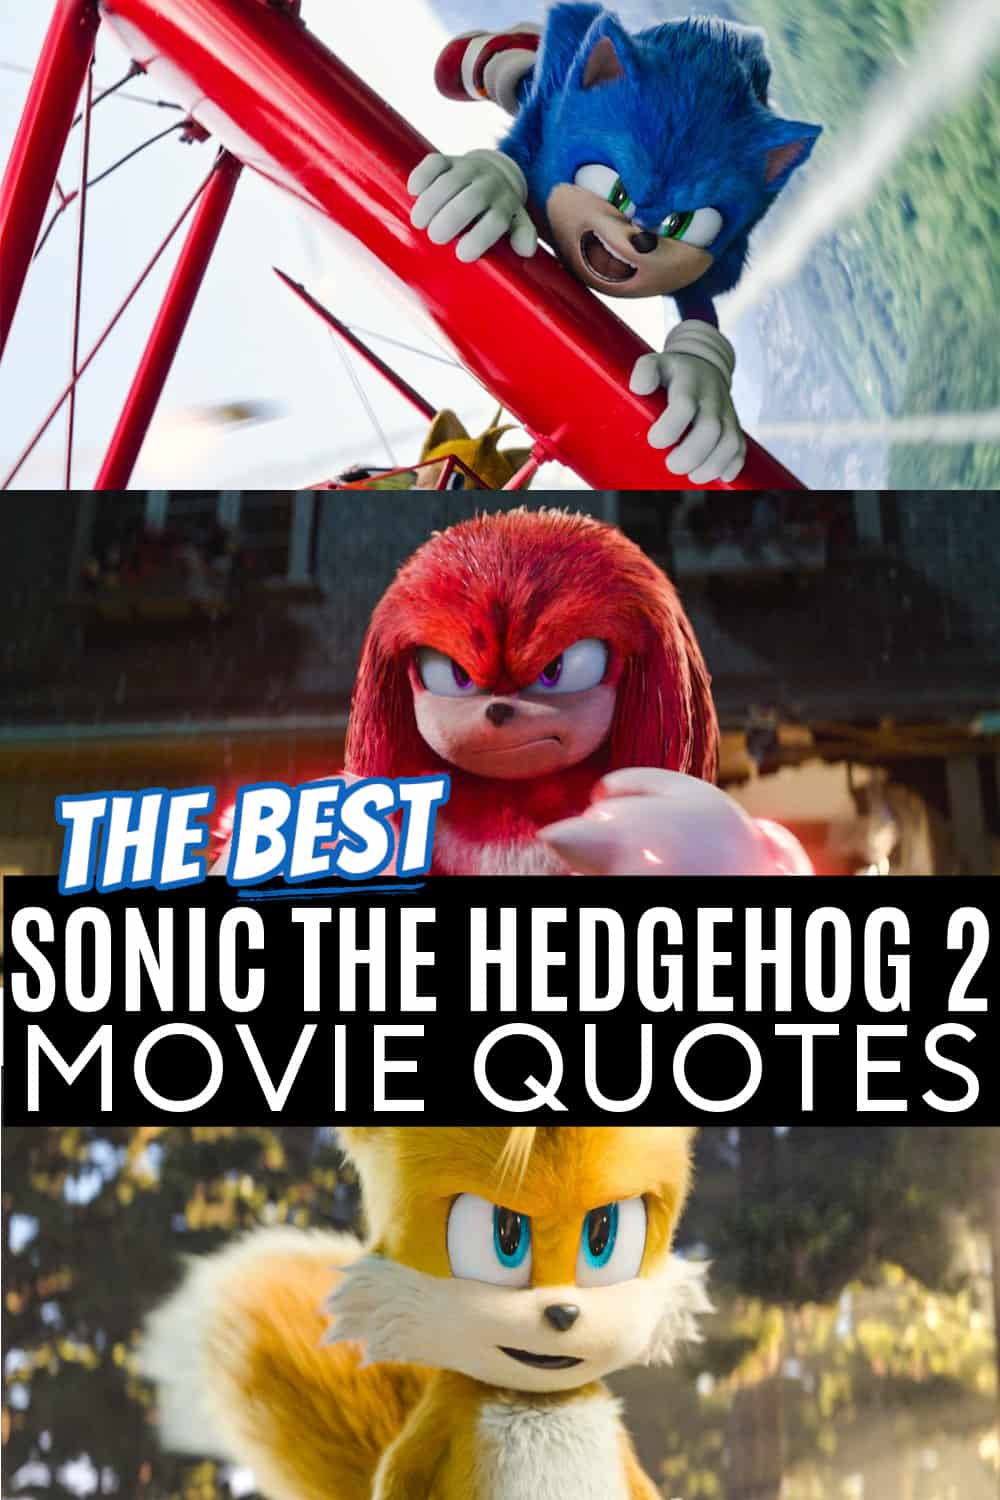 Sonic the Hedgehog 2 quotes from the movie